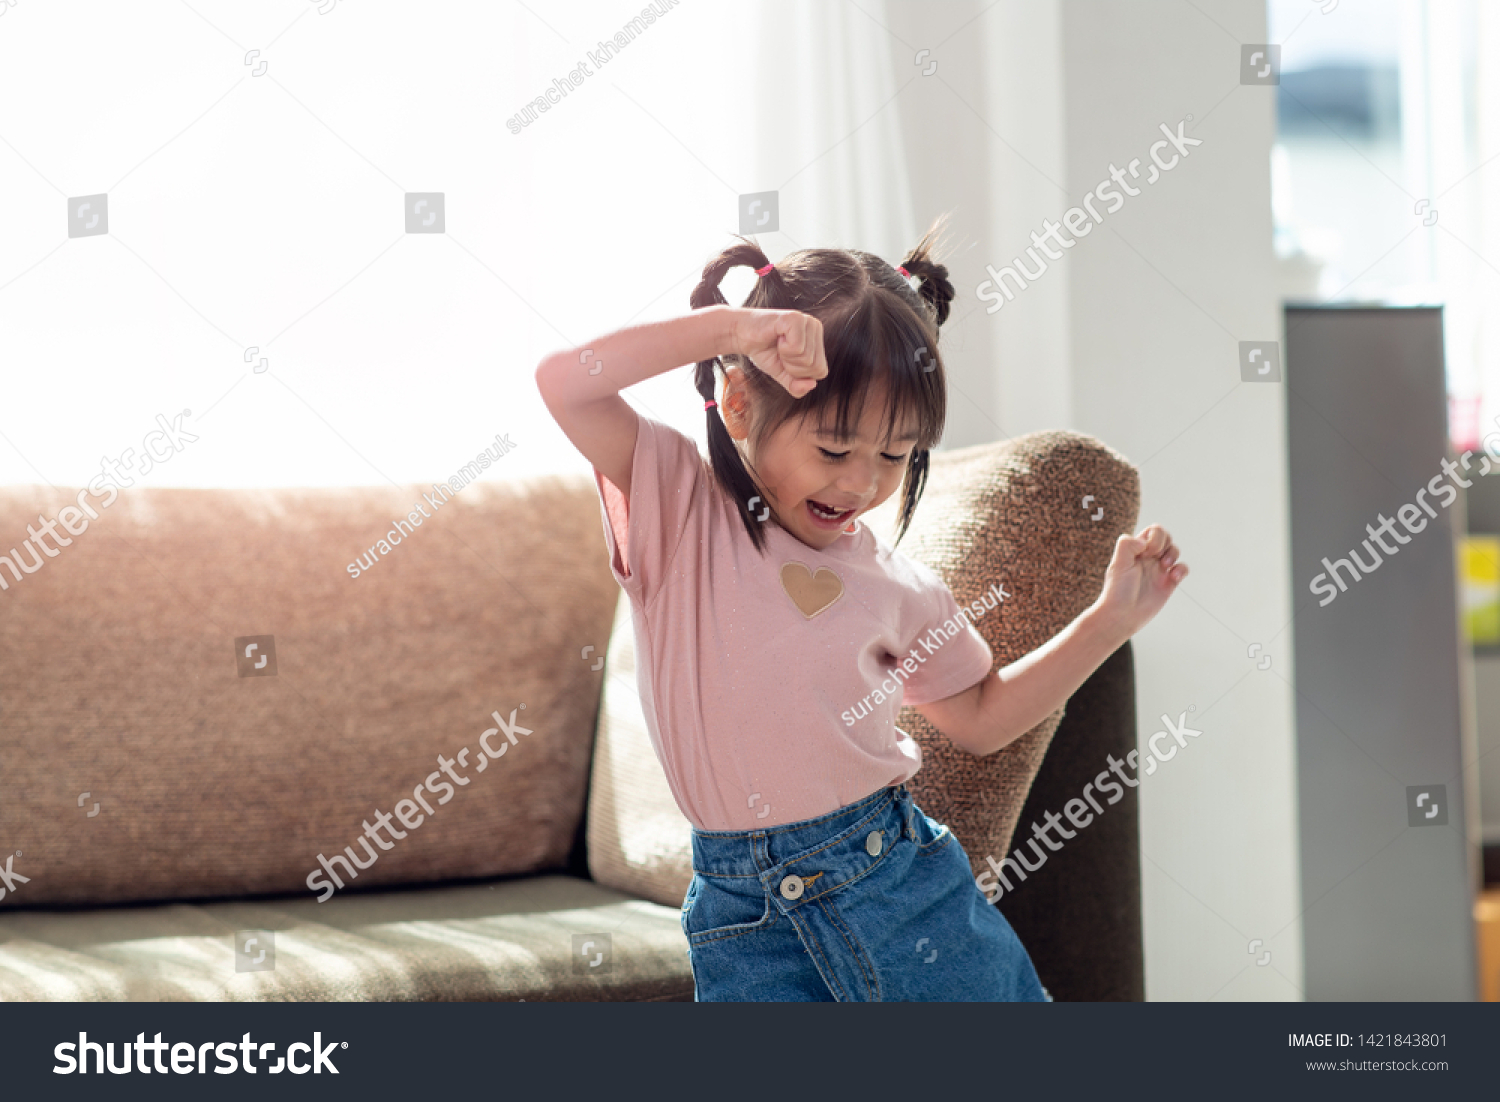 Happy Asian child having fun and dancing in a room, active leisure and lifestyle concept #1421843801